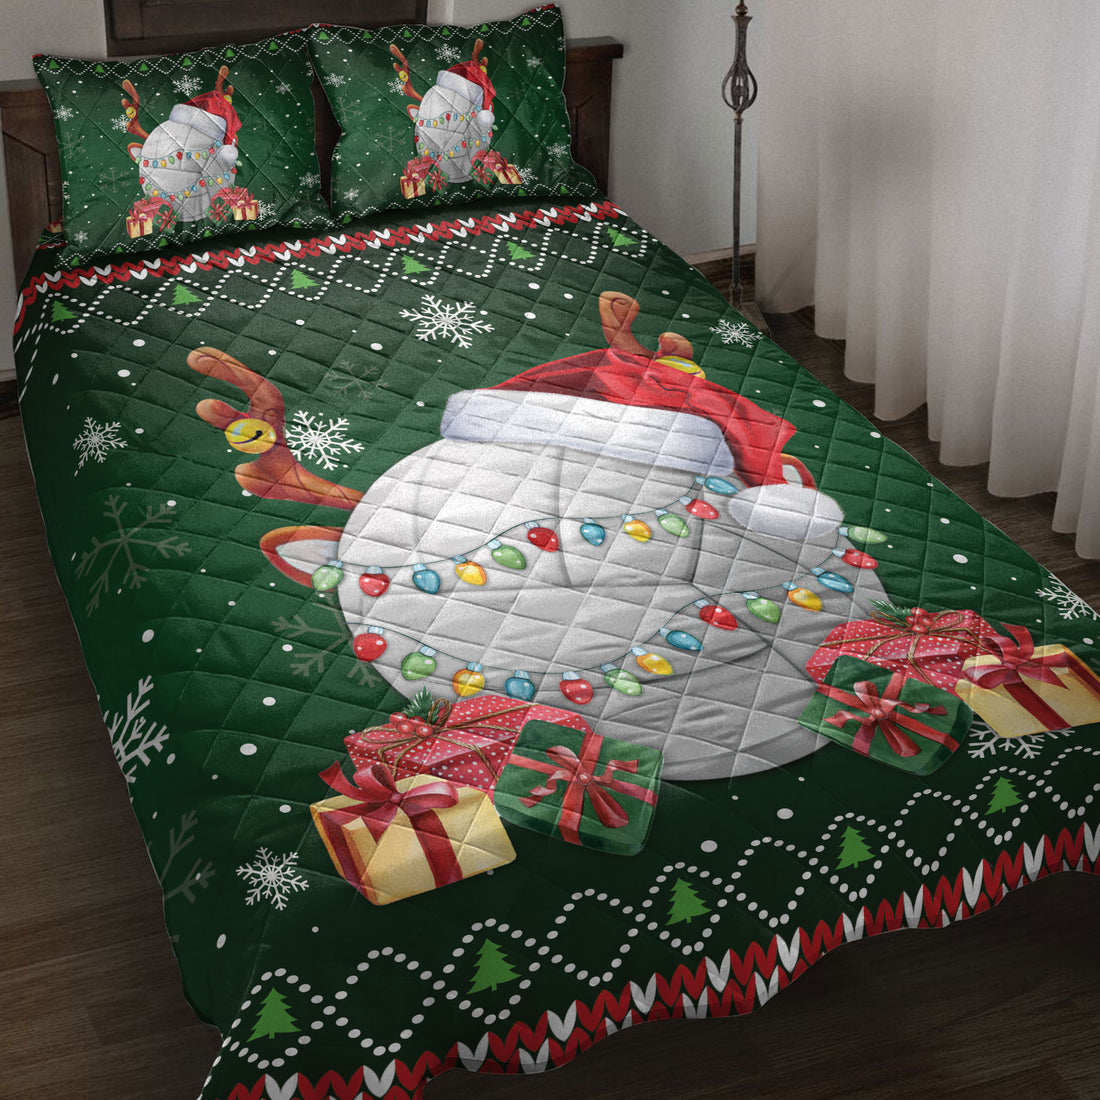 Ohaprints-Quilt-Bed-Set-Pillowcase-Volleyball-Christmas-Hat-Snowflake-Reindeer-Horn-Gift-Ugly-Pattern-Blanket-Bedspread-Bedding-3773-Throw (55'' x 60'')